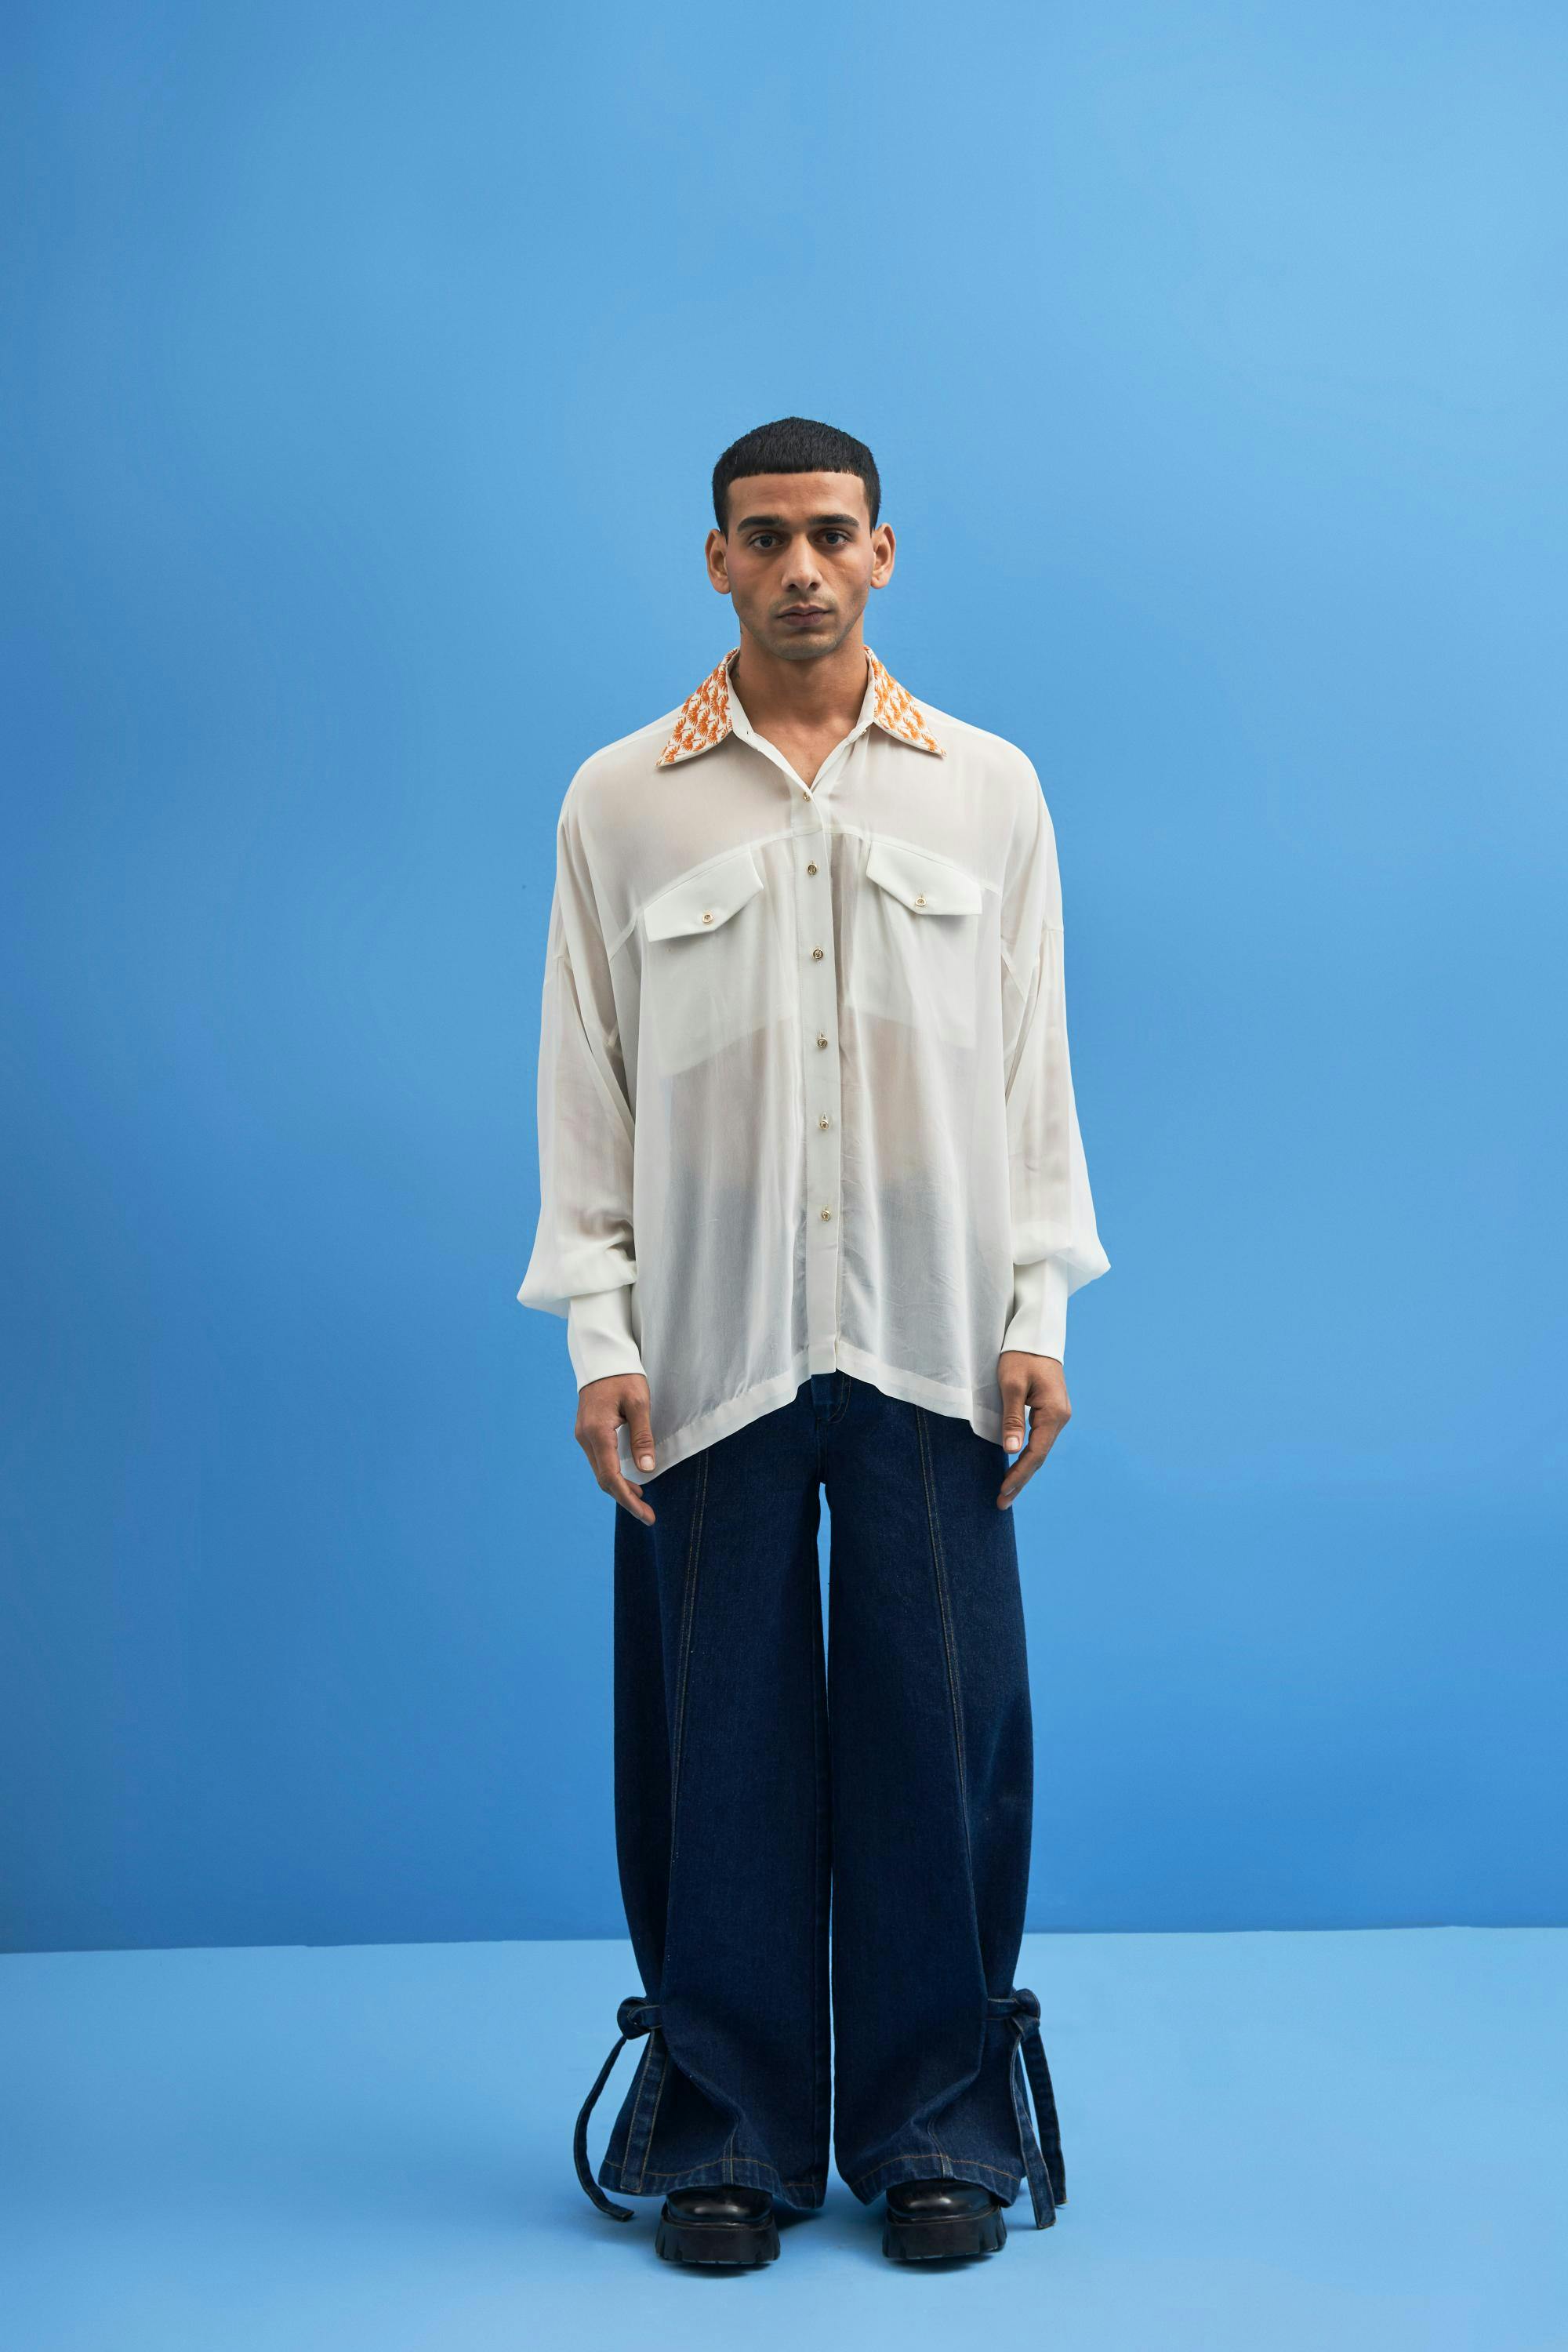 Off-White Crane-Collared Shirt, a product by Siddhant Agrawal Label